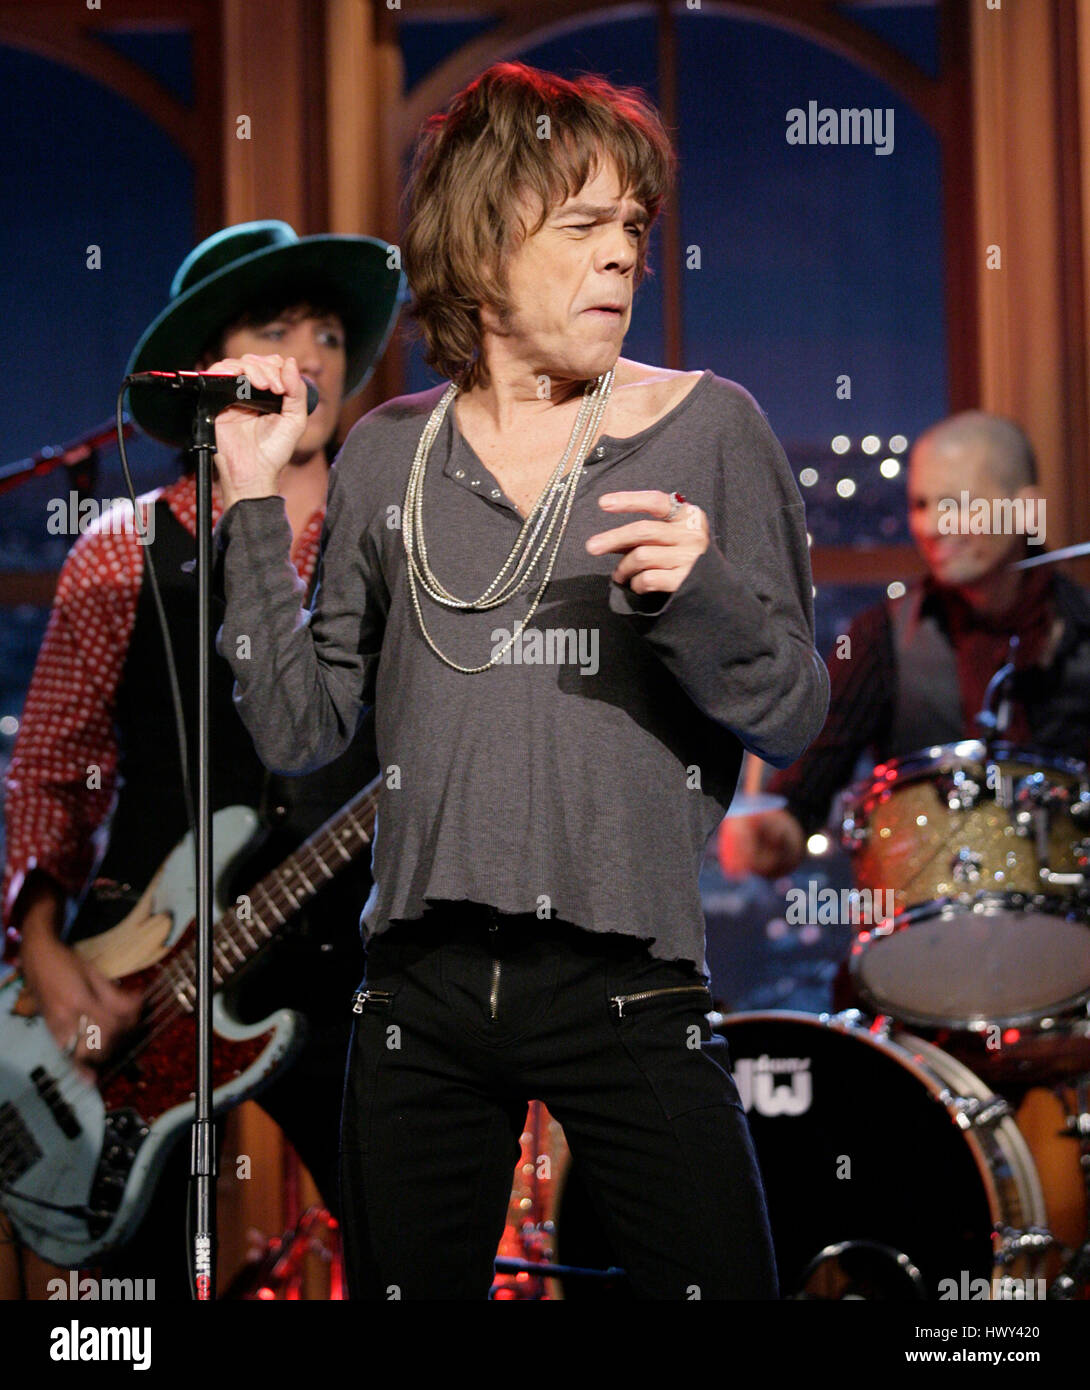 The band, 'New York Dolls' with David Johansen on lead vocals, Brian Delaney on drums, Sami Takamaki-Guy on bass, perform during a segment of 'The Late Late Show with Craig Ferguson' at CBS Television City in Los Angeles on Tuesday, Oct. 28, 2008. Photo by Francis Specker Stock Photo